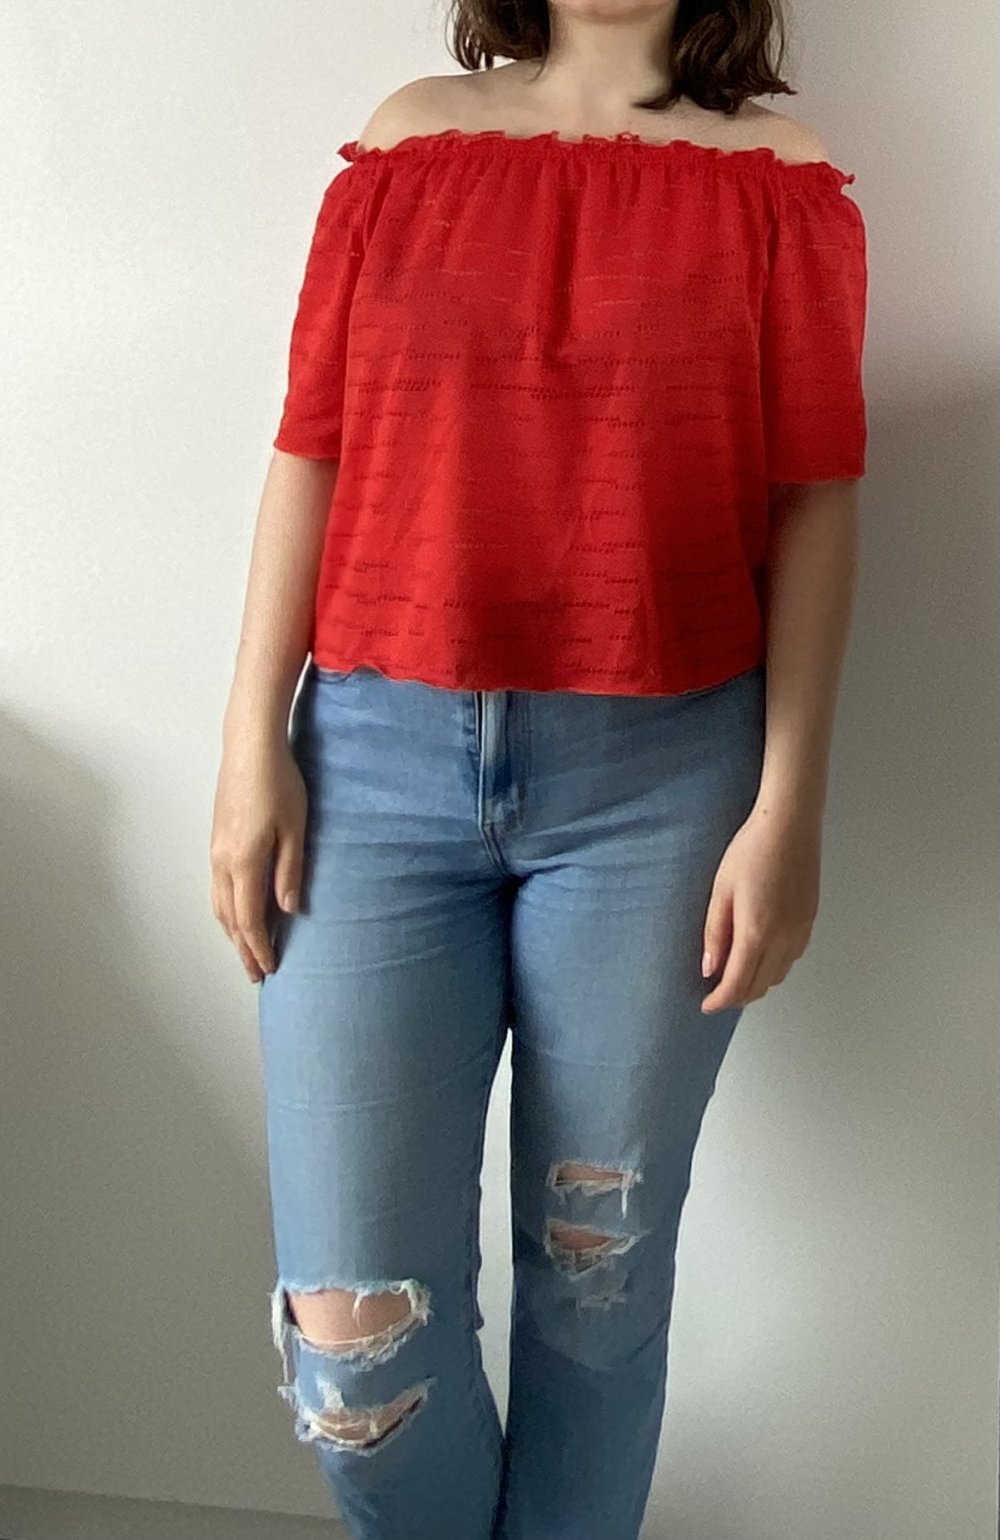 Rote Cropped Bluse